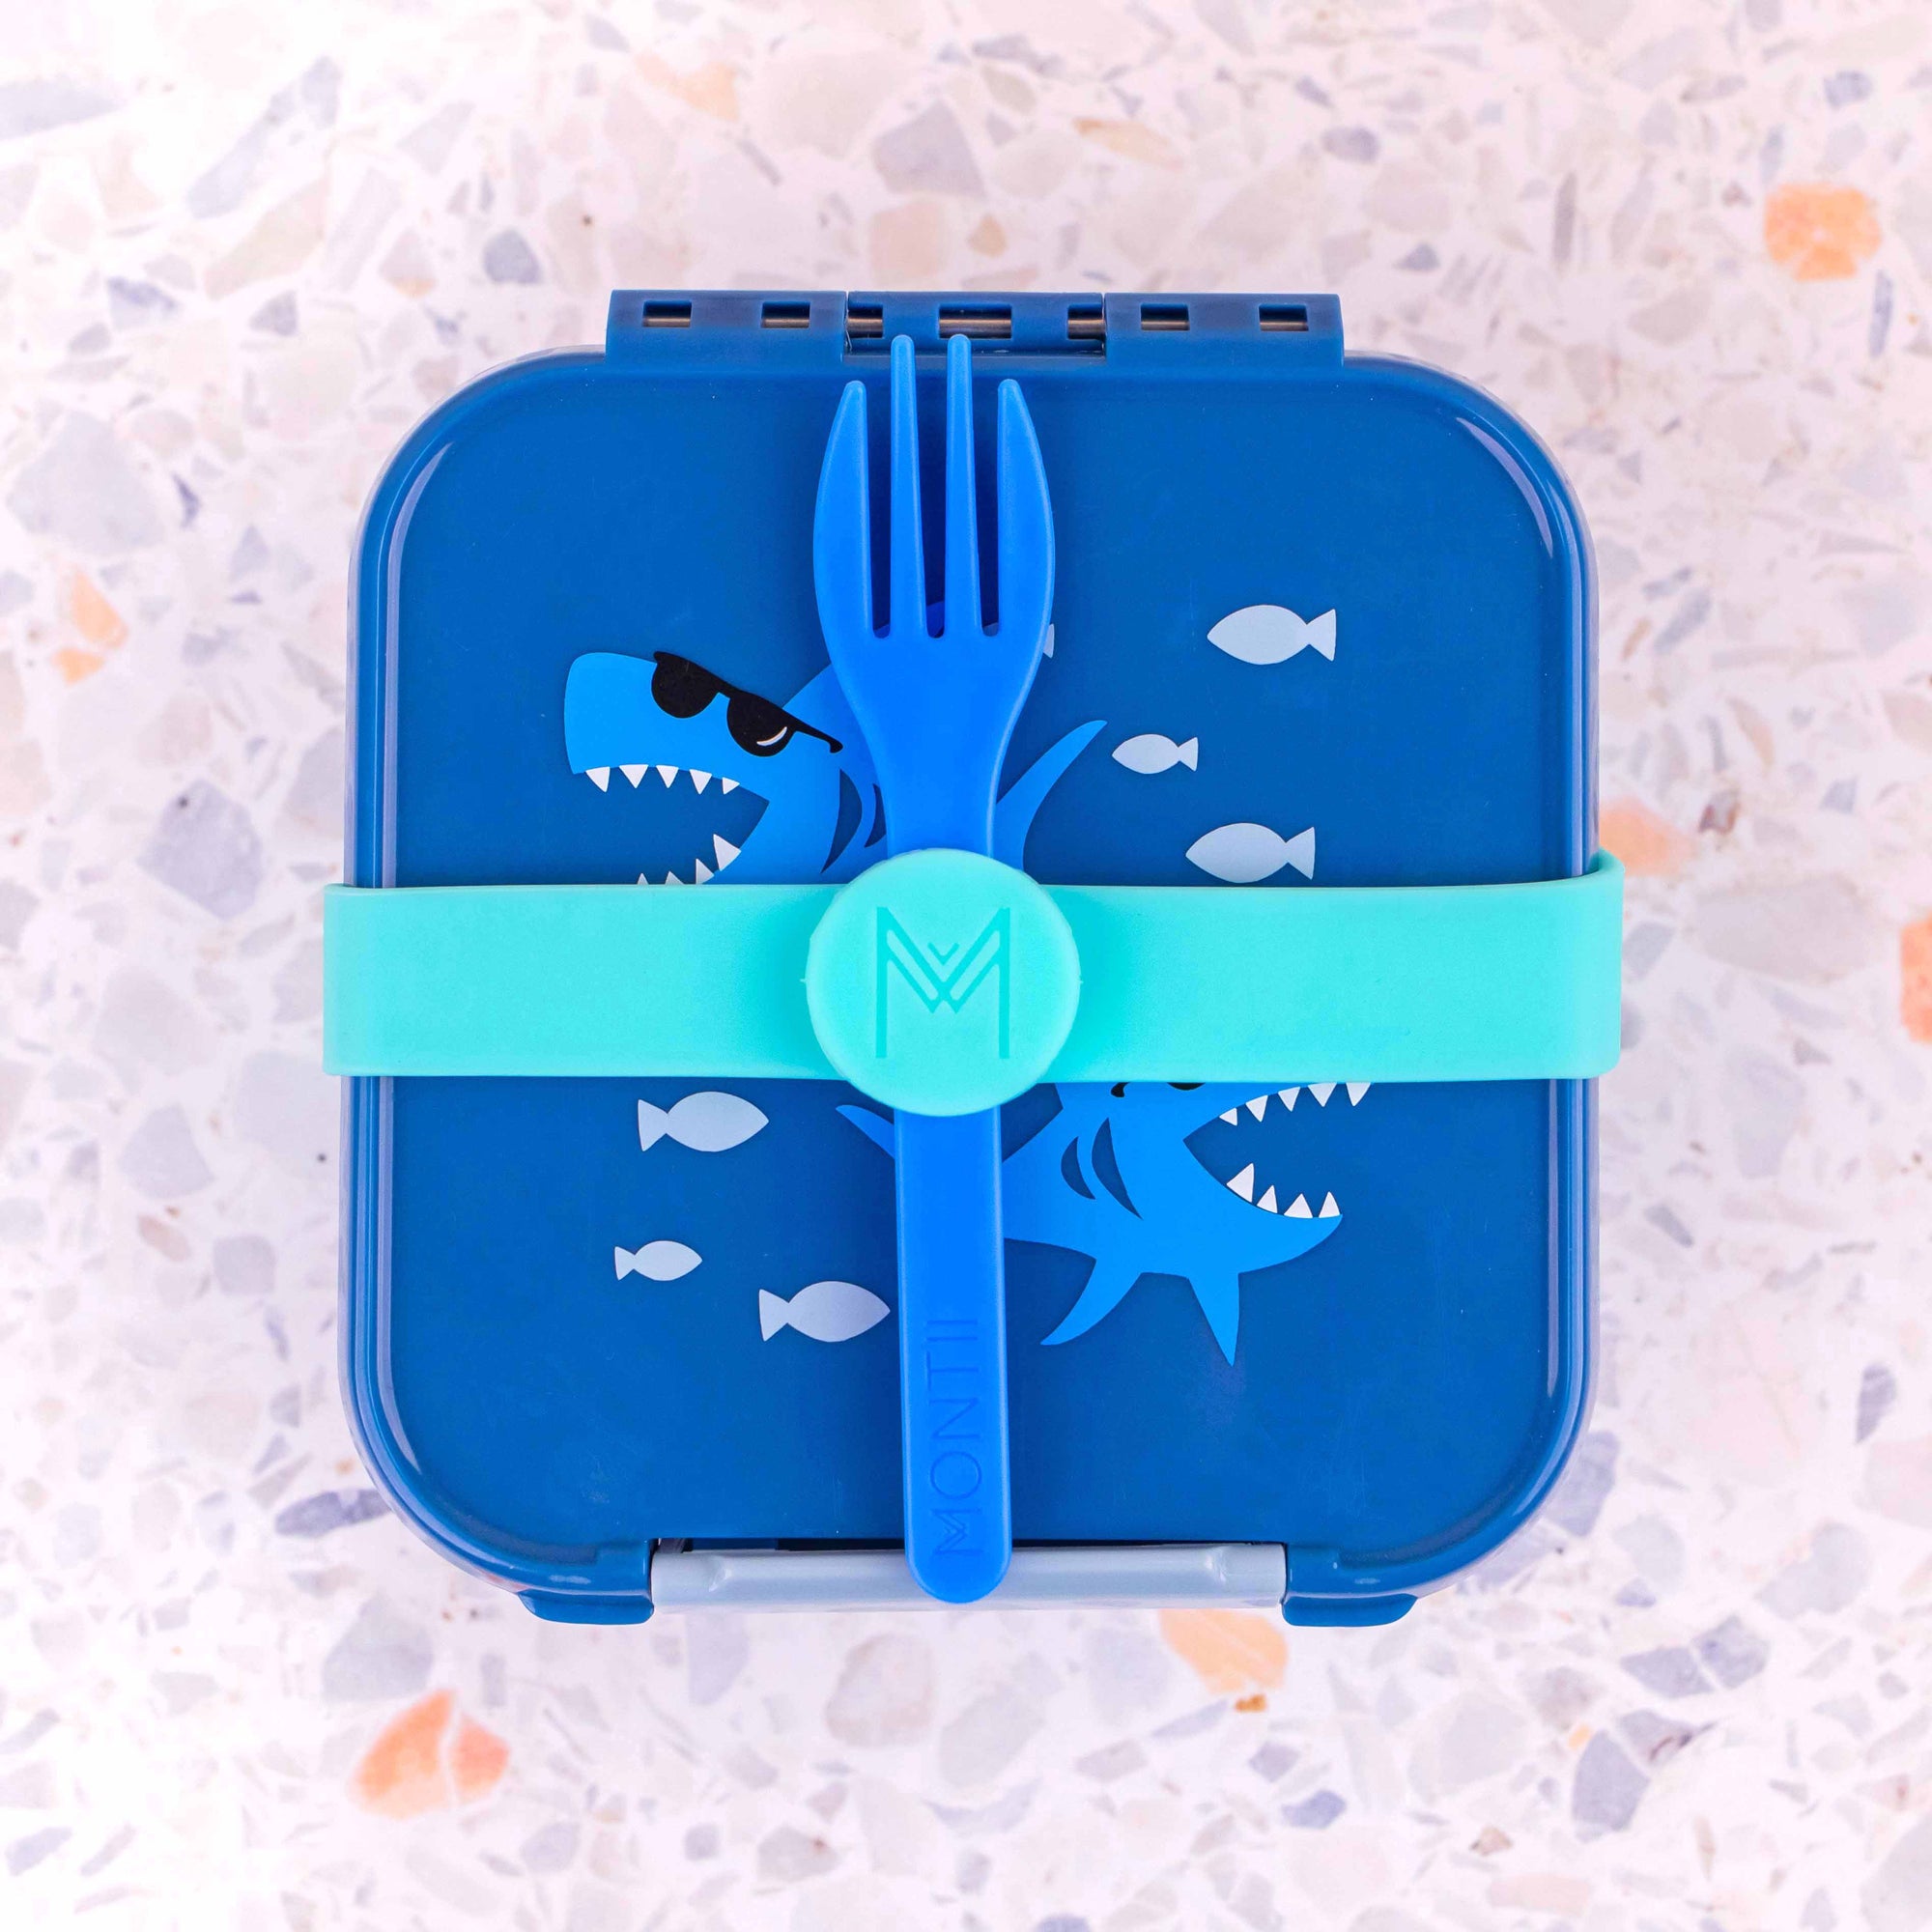 MontiiCo silicone cutlery band p - Mikki and Me Kids